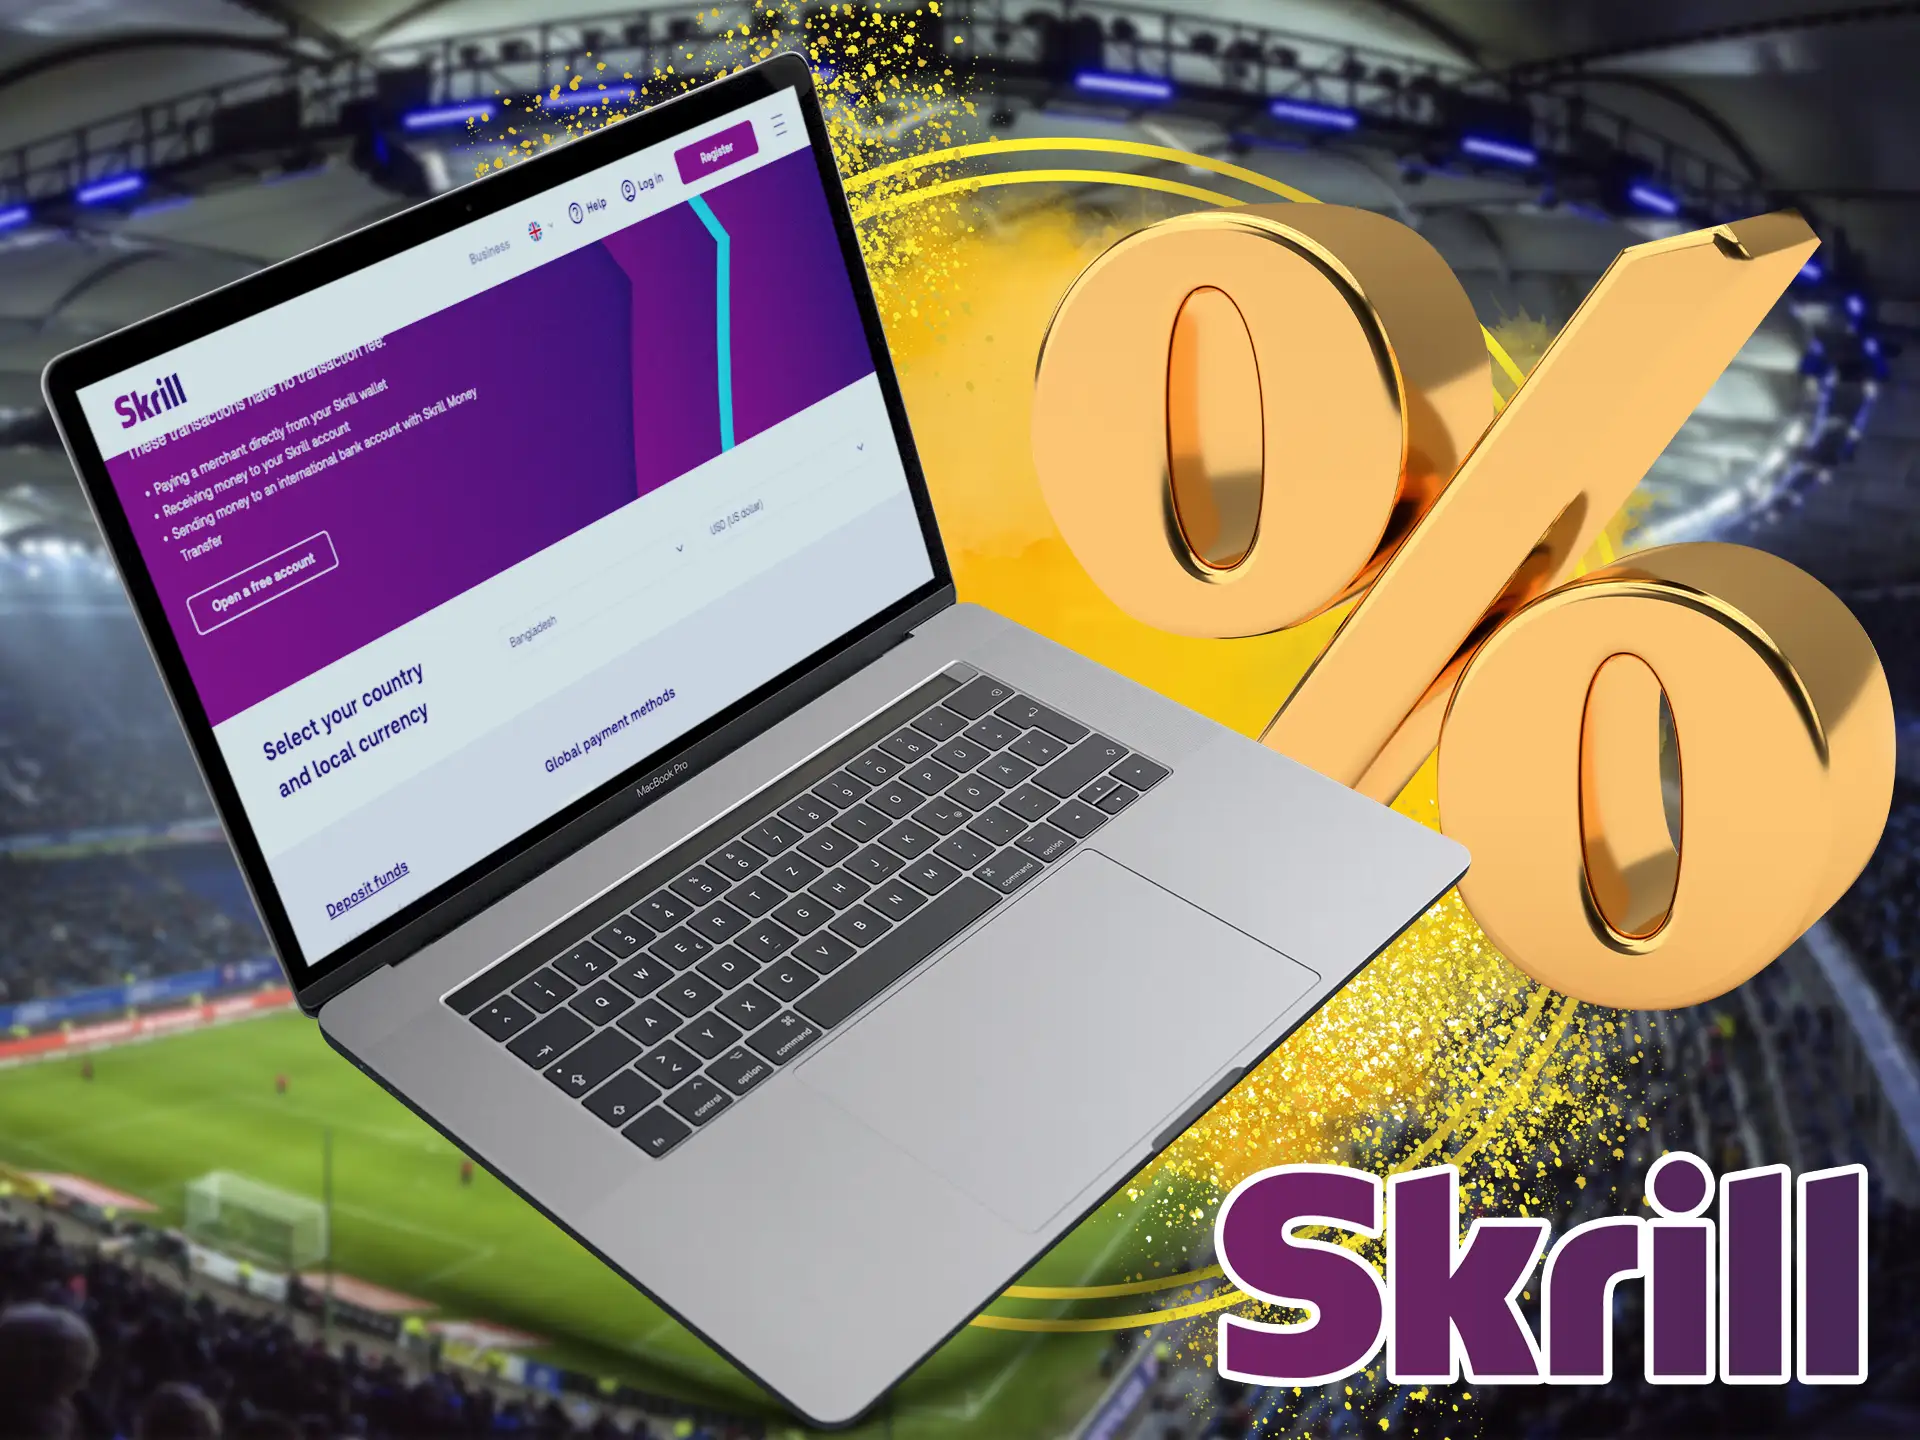 Unfortunately there are some restrictions when using the Skrill system that players should be aware of.